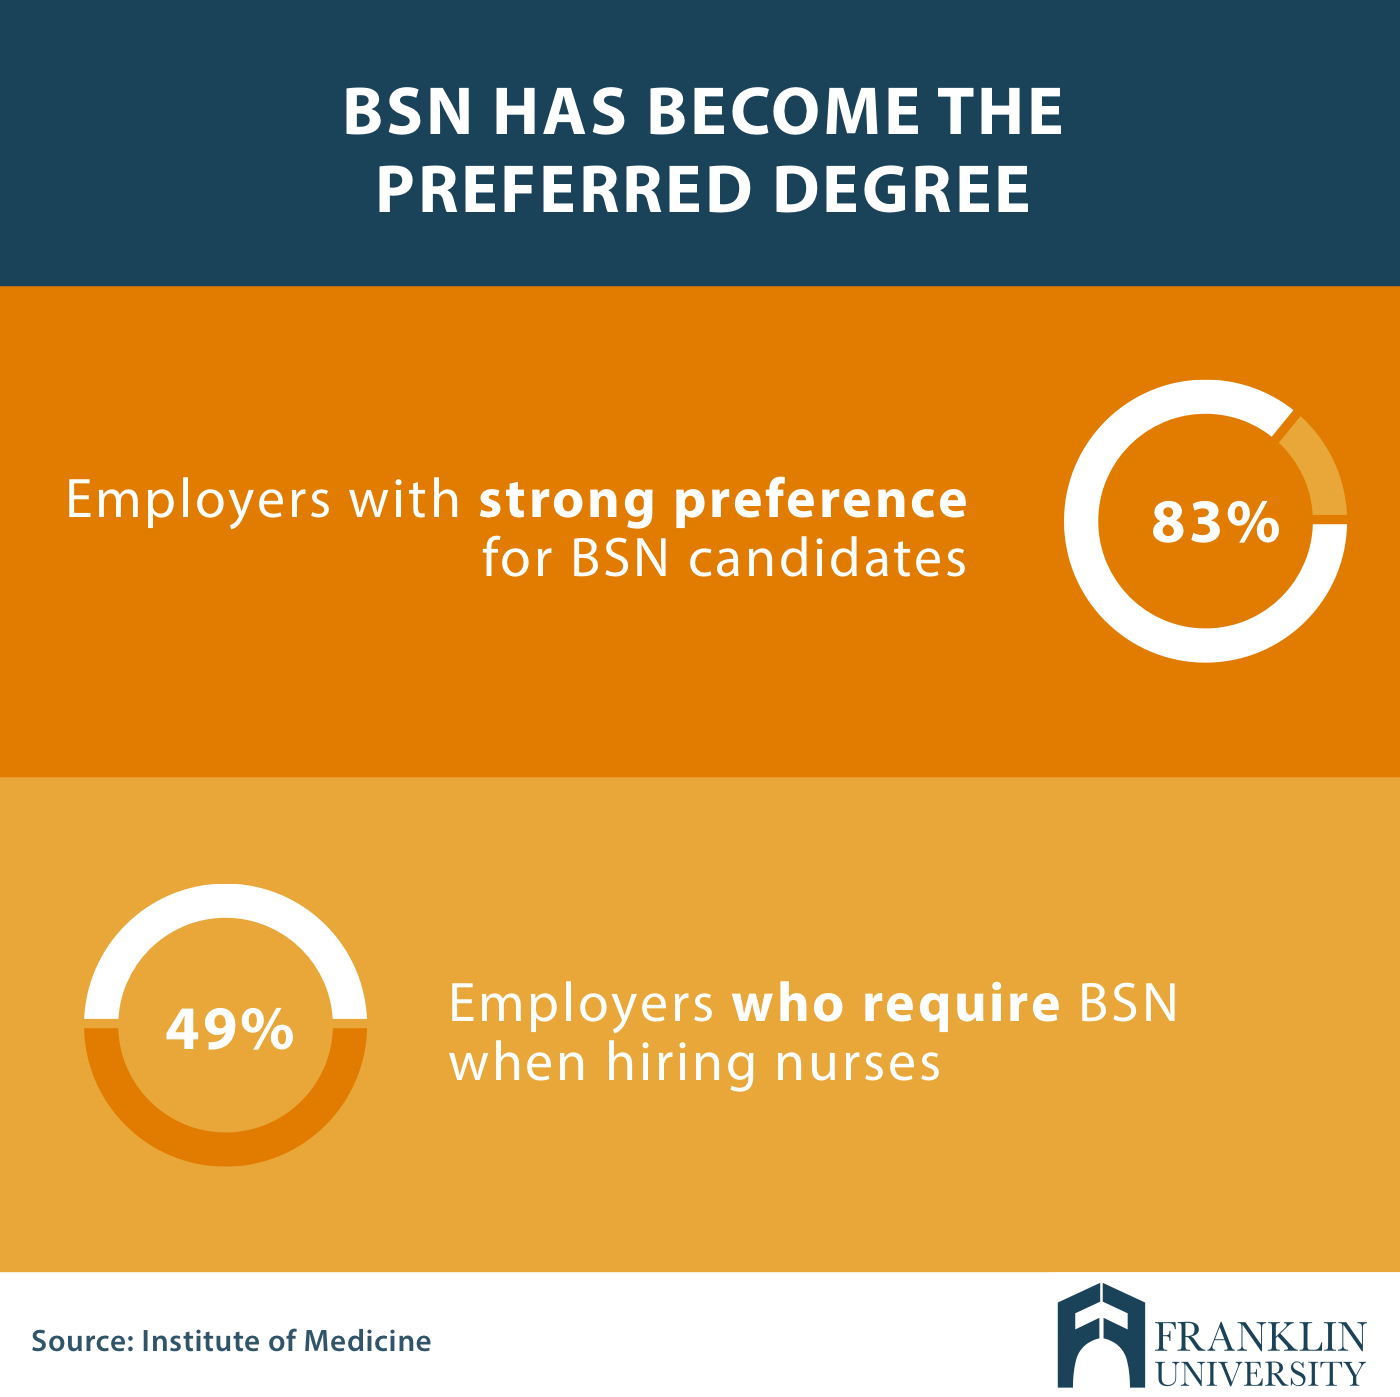 graphic describes how the BSN has become the preferred degree